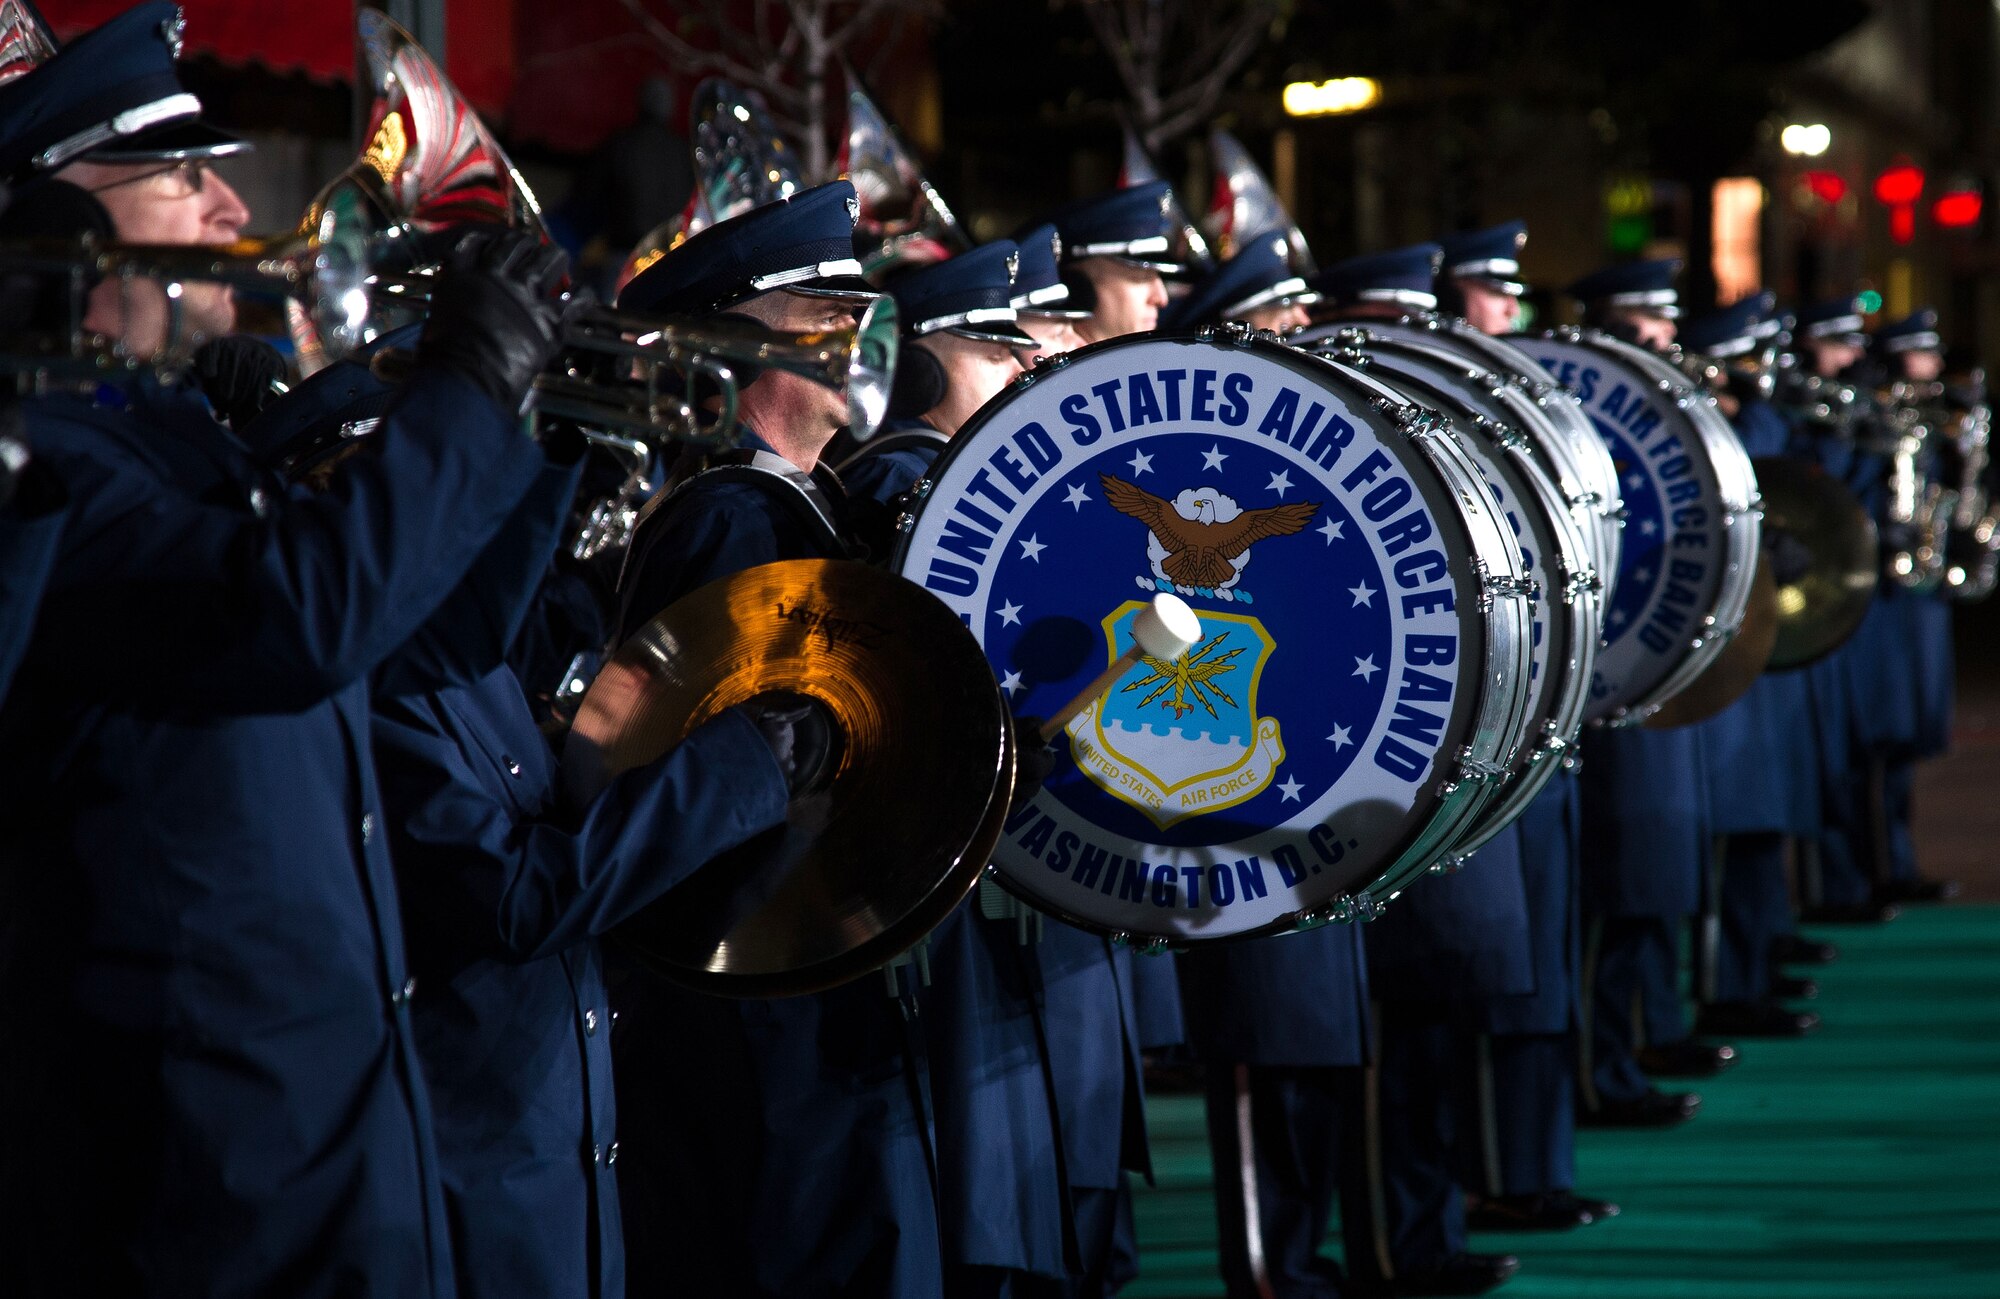 The U.S. Air Force Band practices at Herald Square, Nov. 22, 2012, in New York City. The 200 Airmen from the USAF Band and Honor Guard showcased Air Force power and precision to a televised audience of 55 million viewers during the 86th Annual Macy's Thanksgiving Day Parade. (U.S. Air Force photo by Senior Airman Perry Aston)